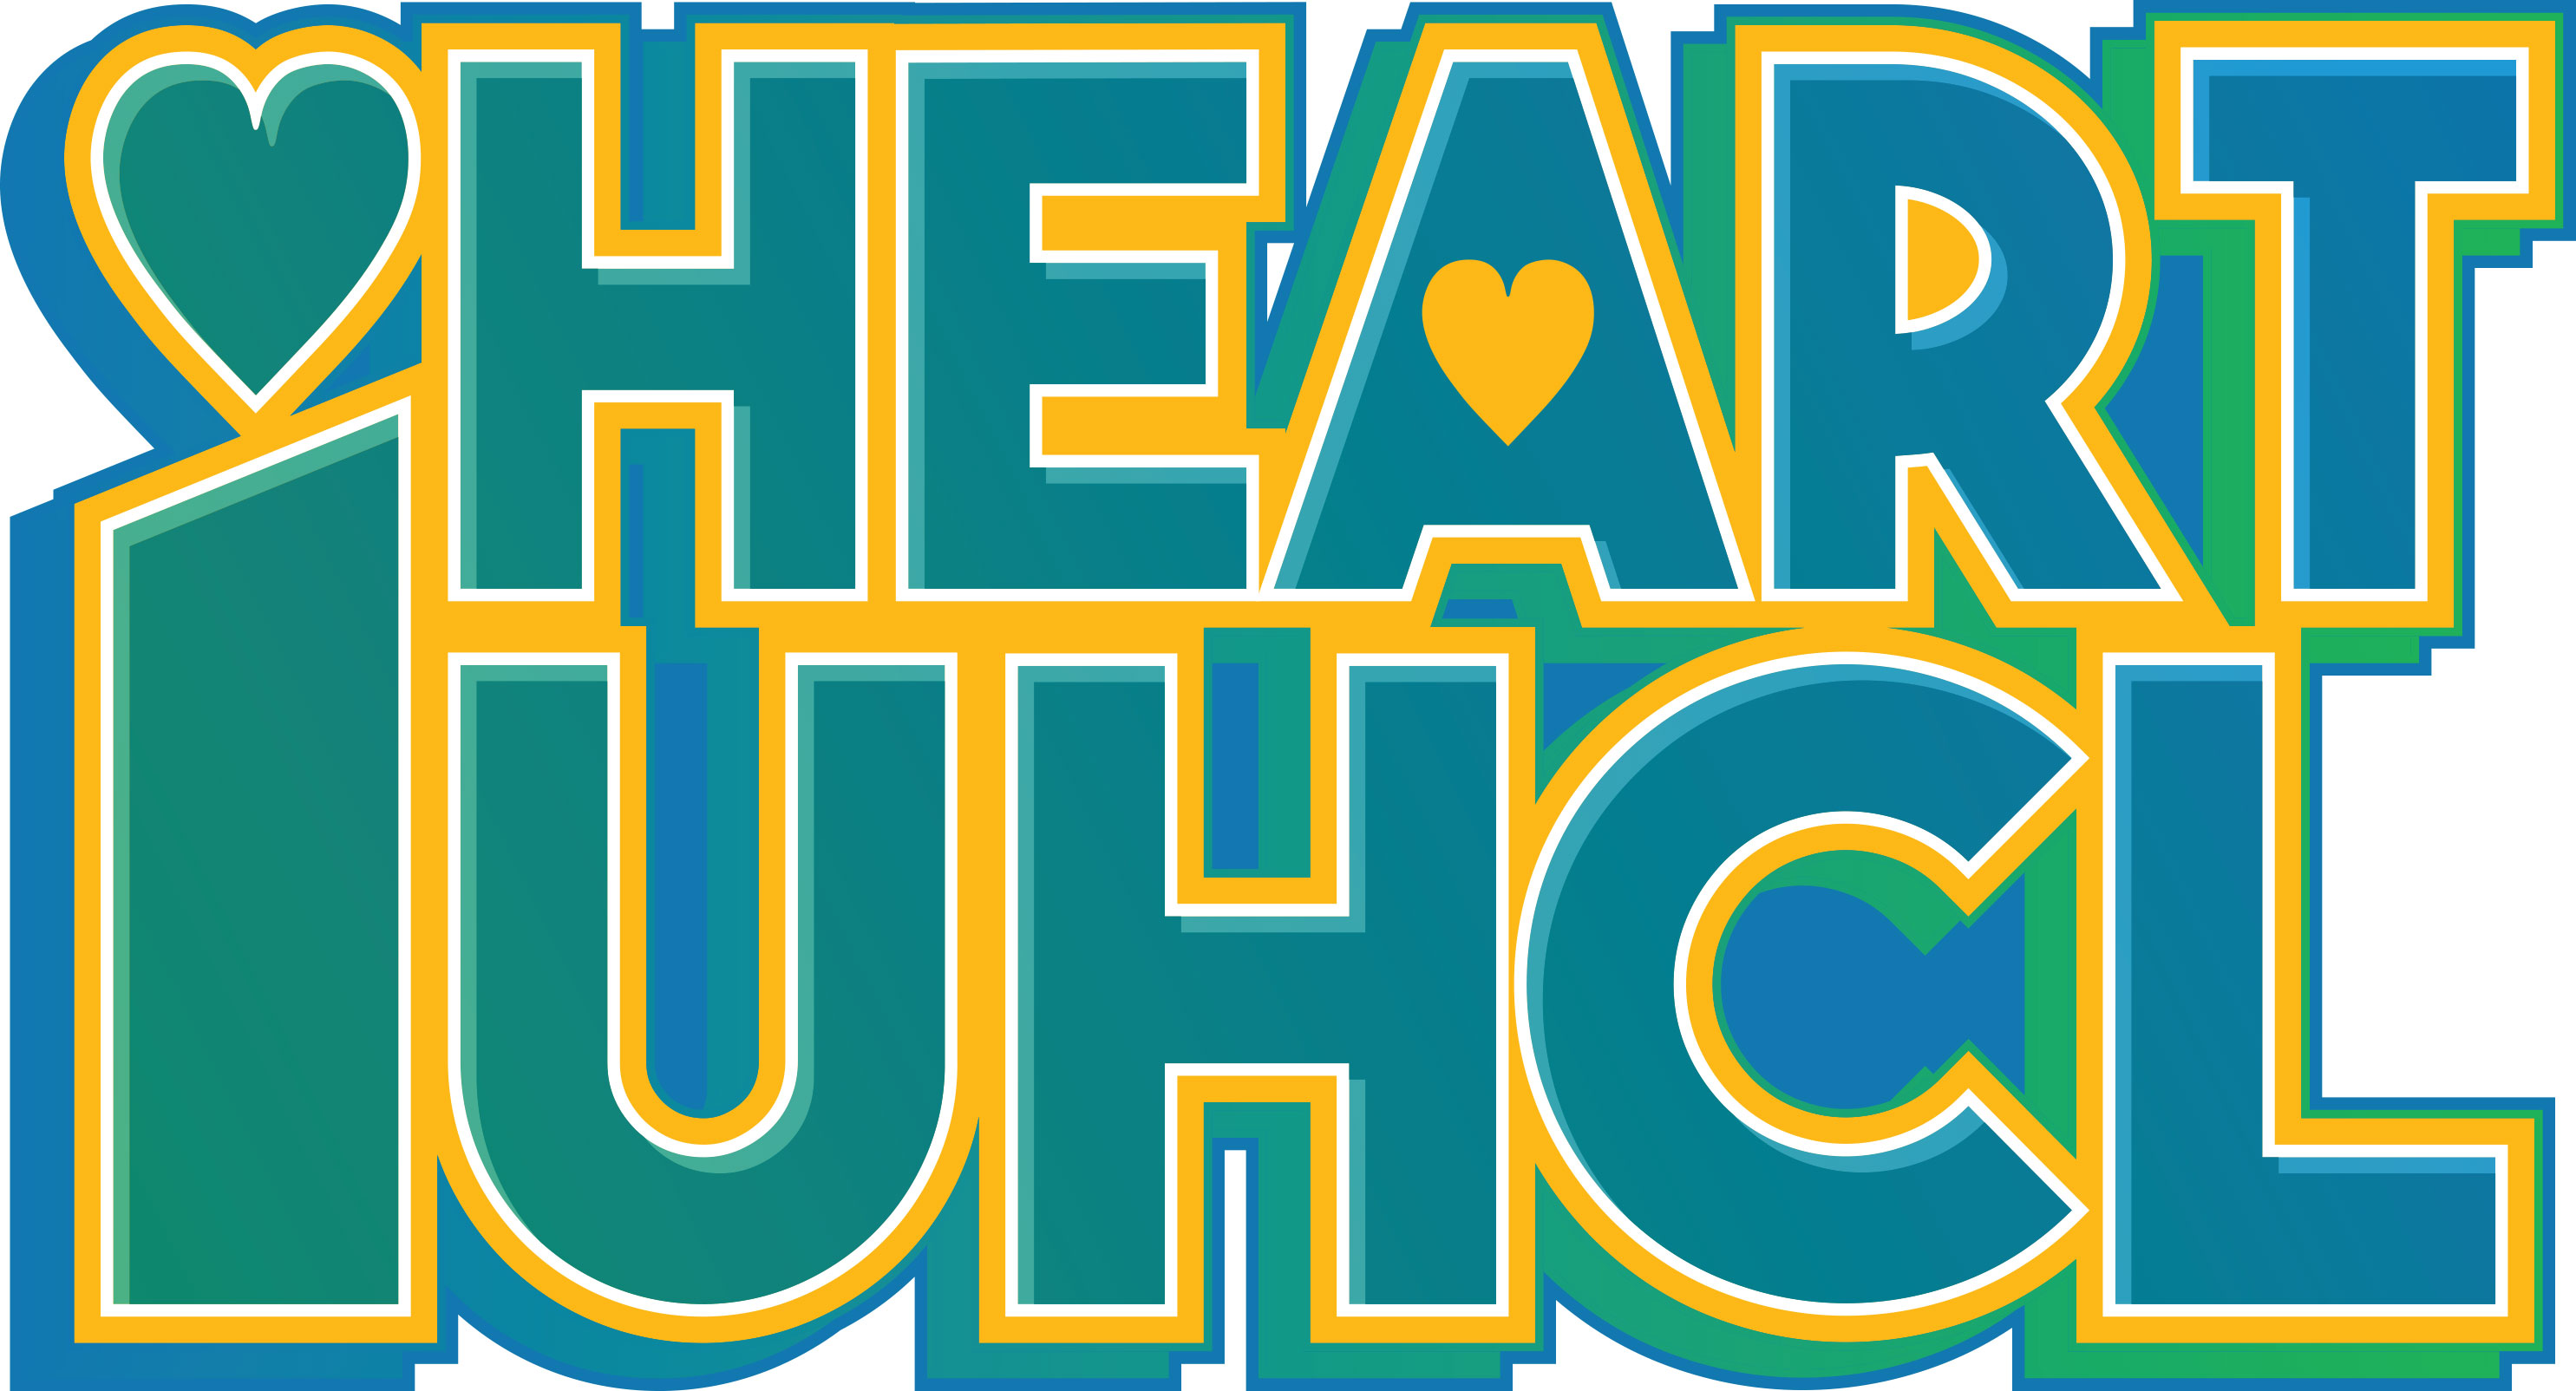 Graphic: Typographic graphic of "I Heart UHCL," created for Spirit Week 2015. Graphic created by The Signal Managing Editor Dave Silverio.